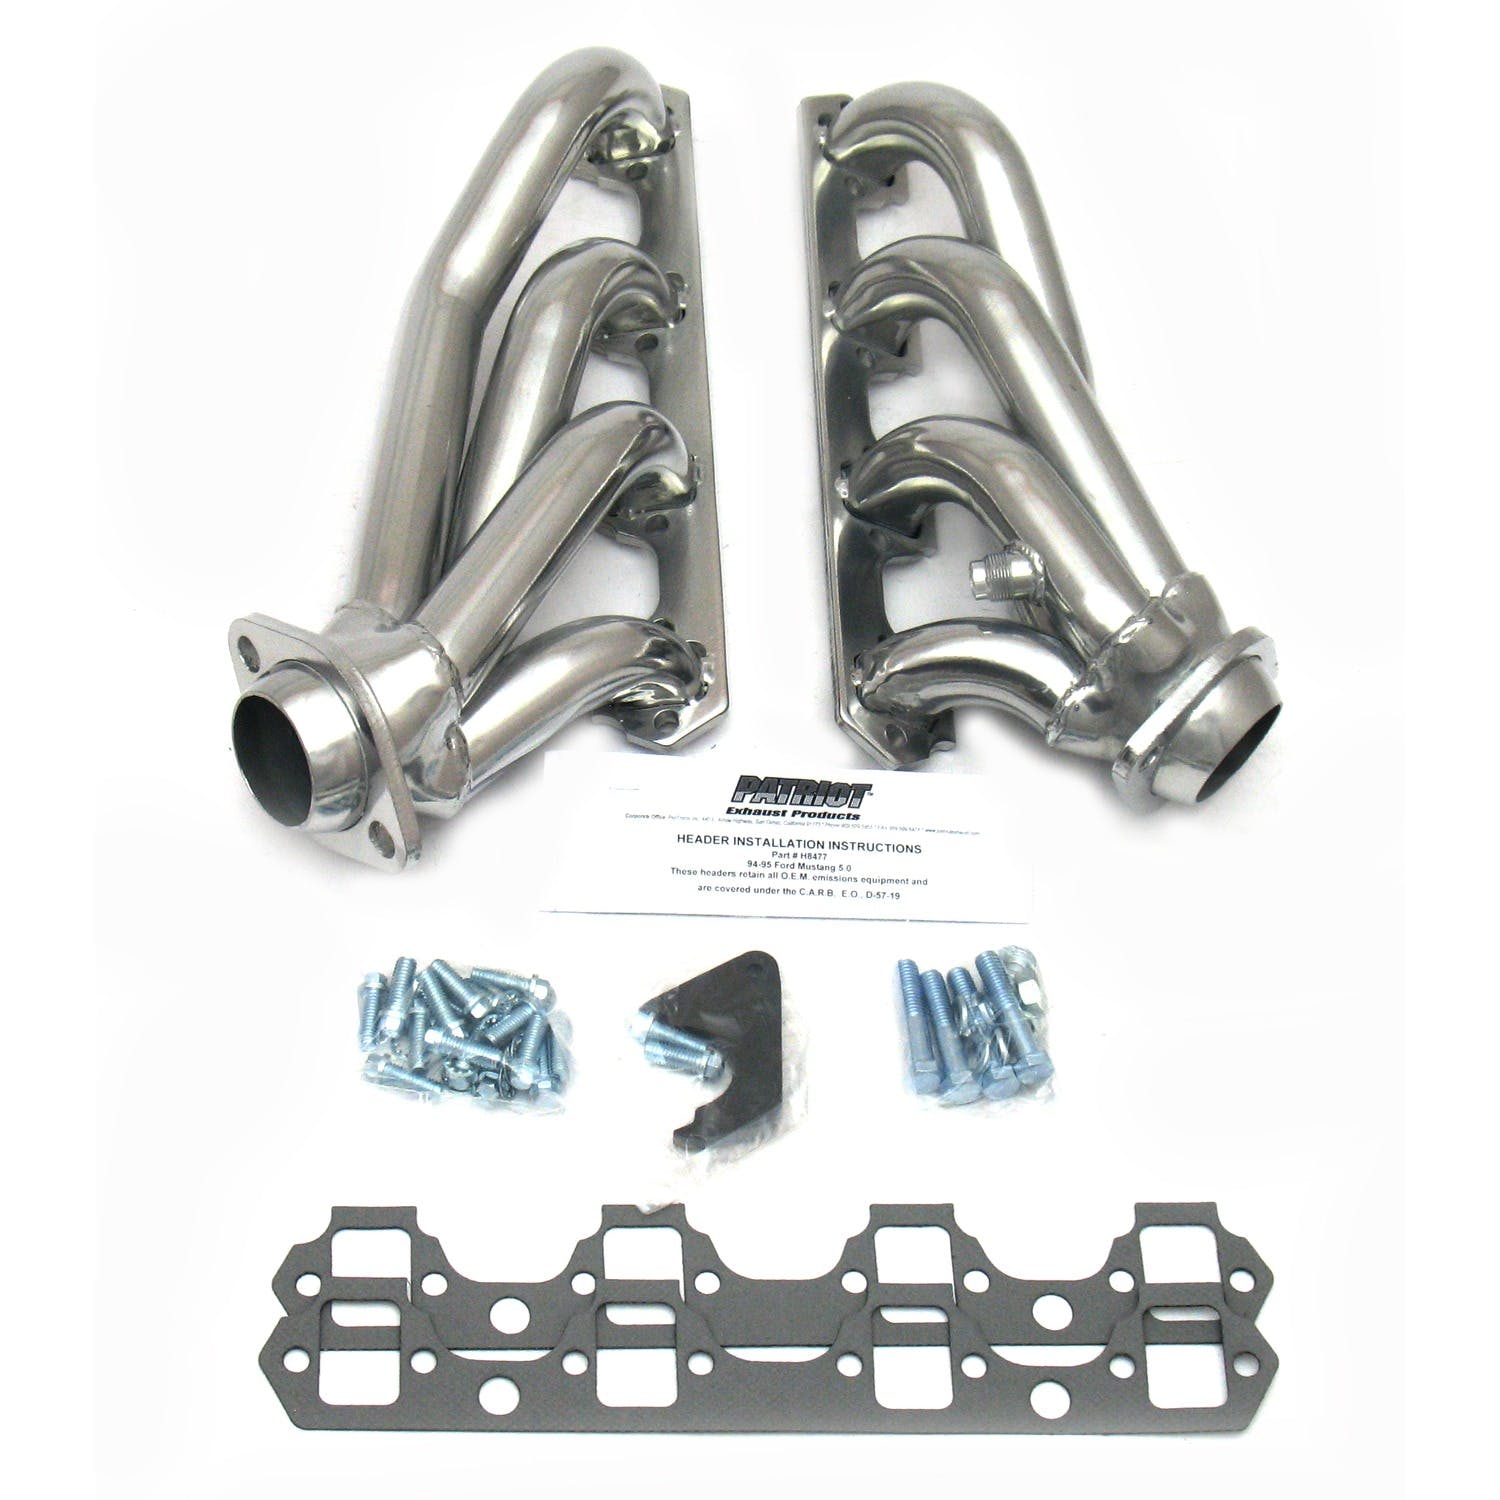 Patriot Exhaust H8477-1 86-93 Mustang 5.0 Emission Legal Silver